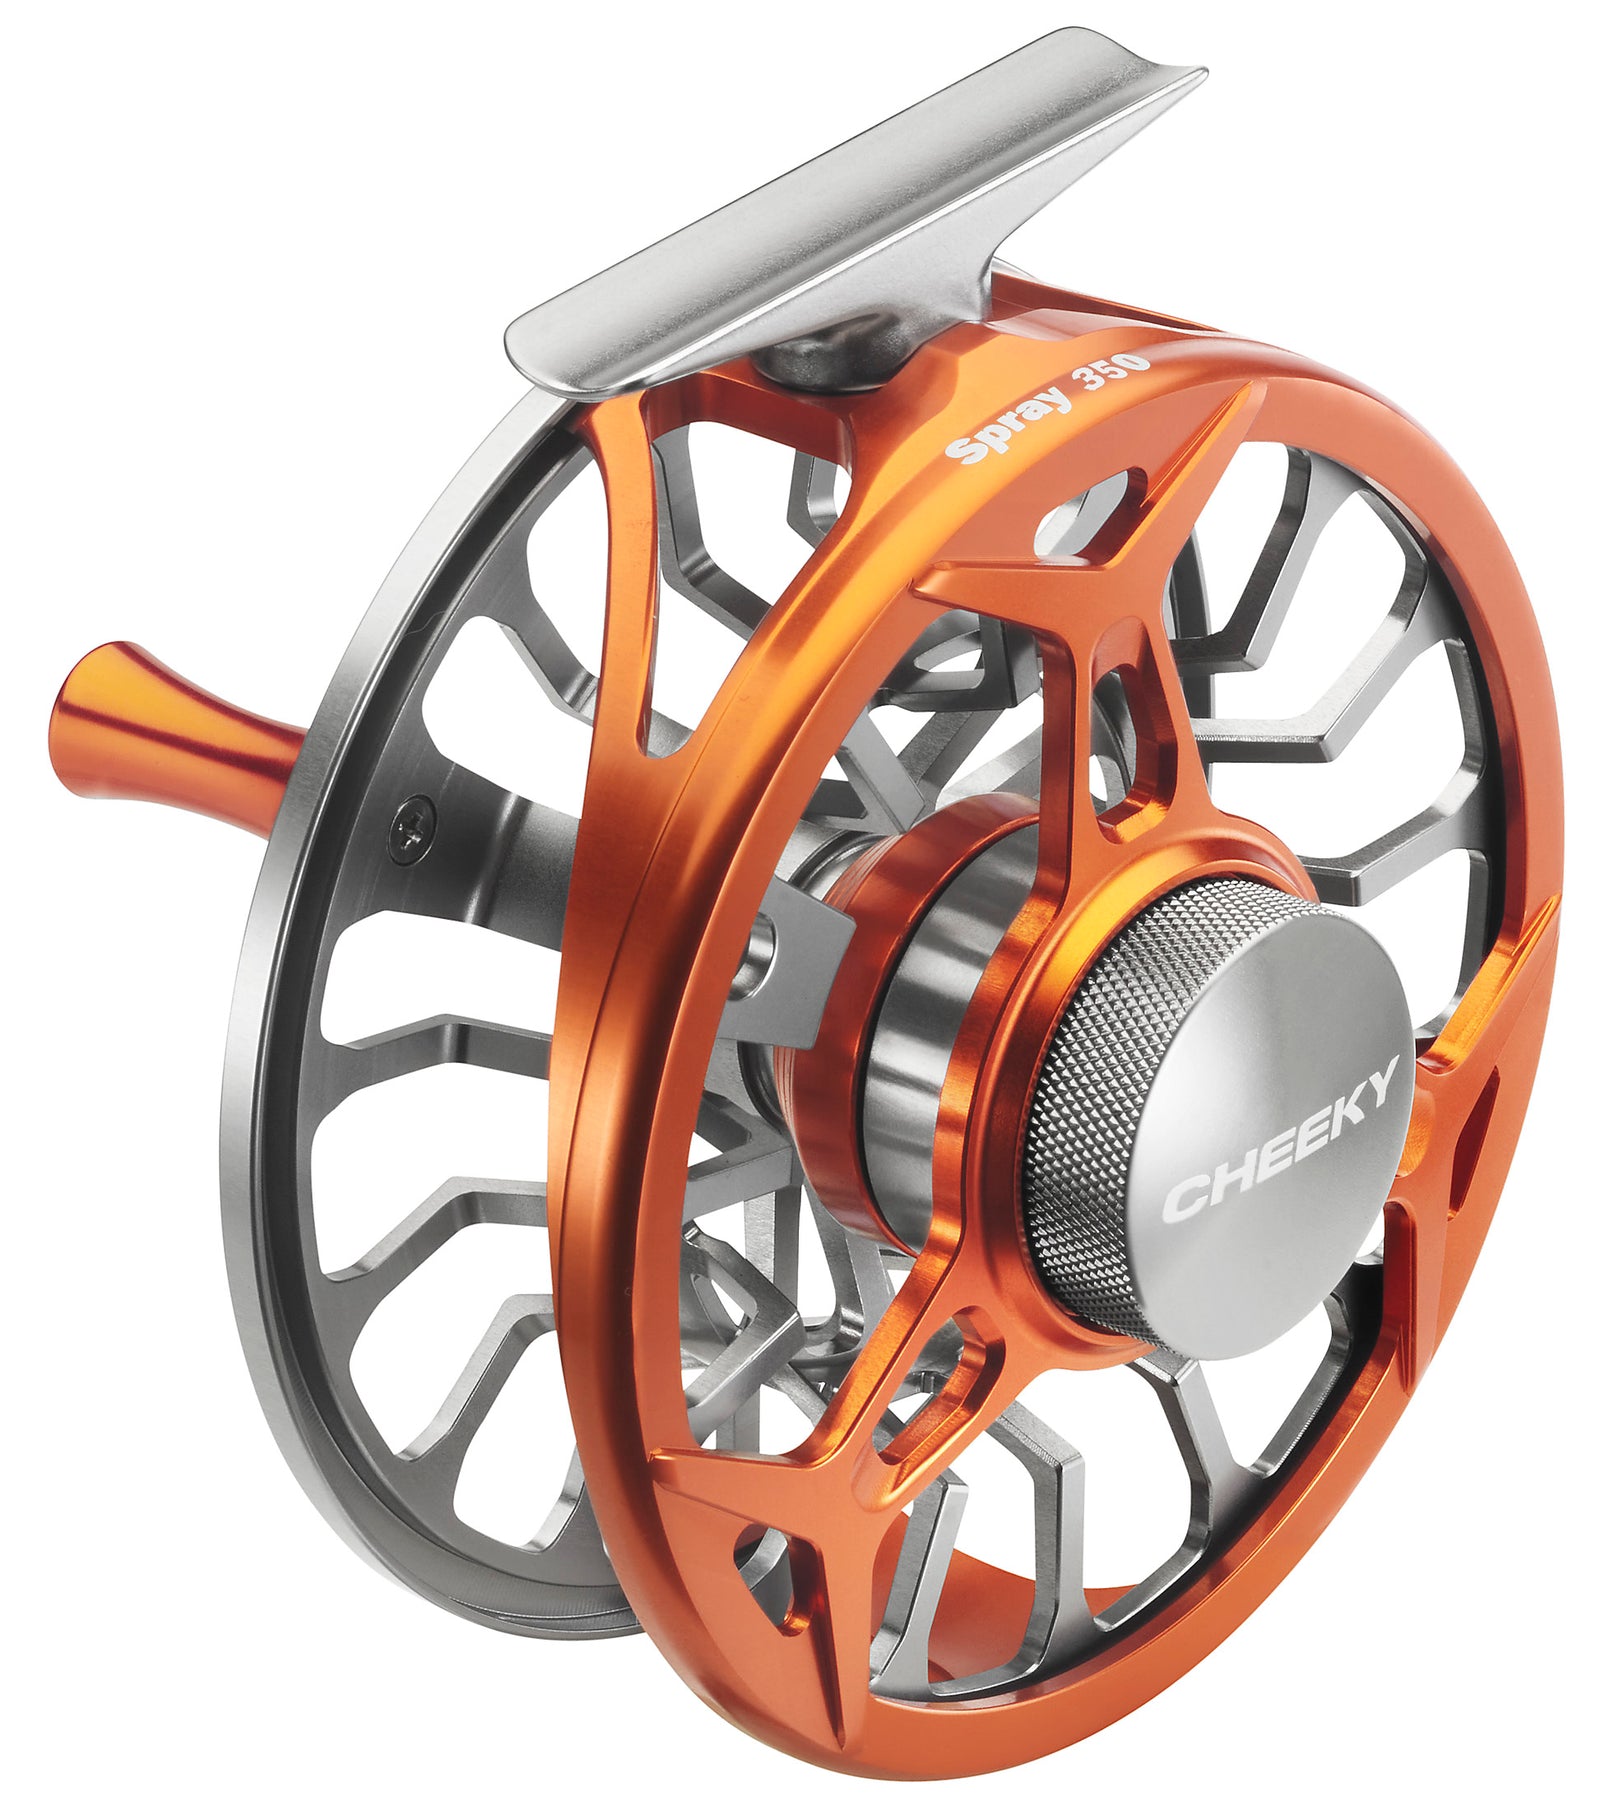 Orvis Mirage V Fly Reel Review - Trident Fly Fishing